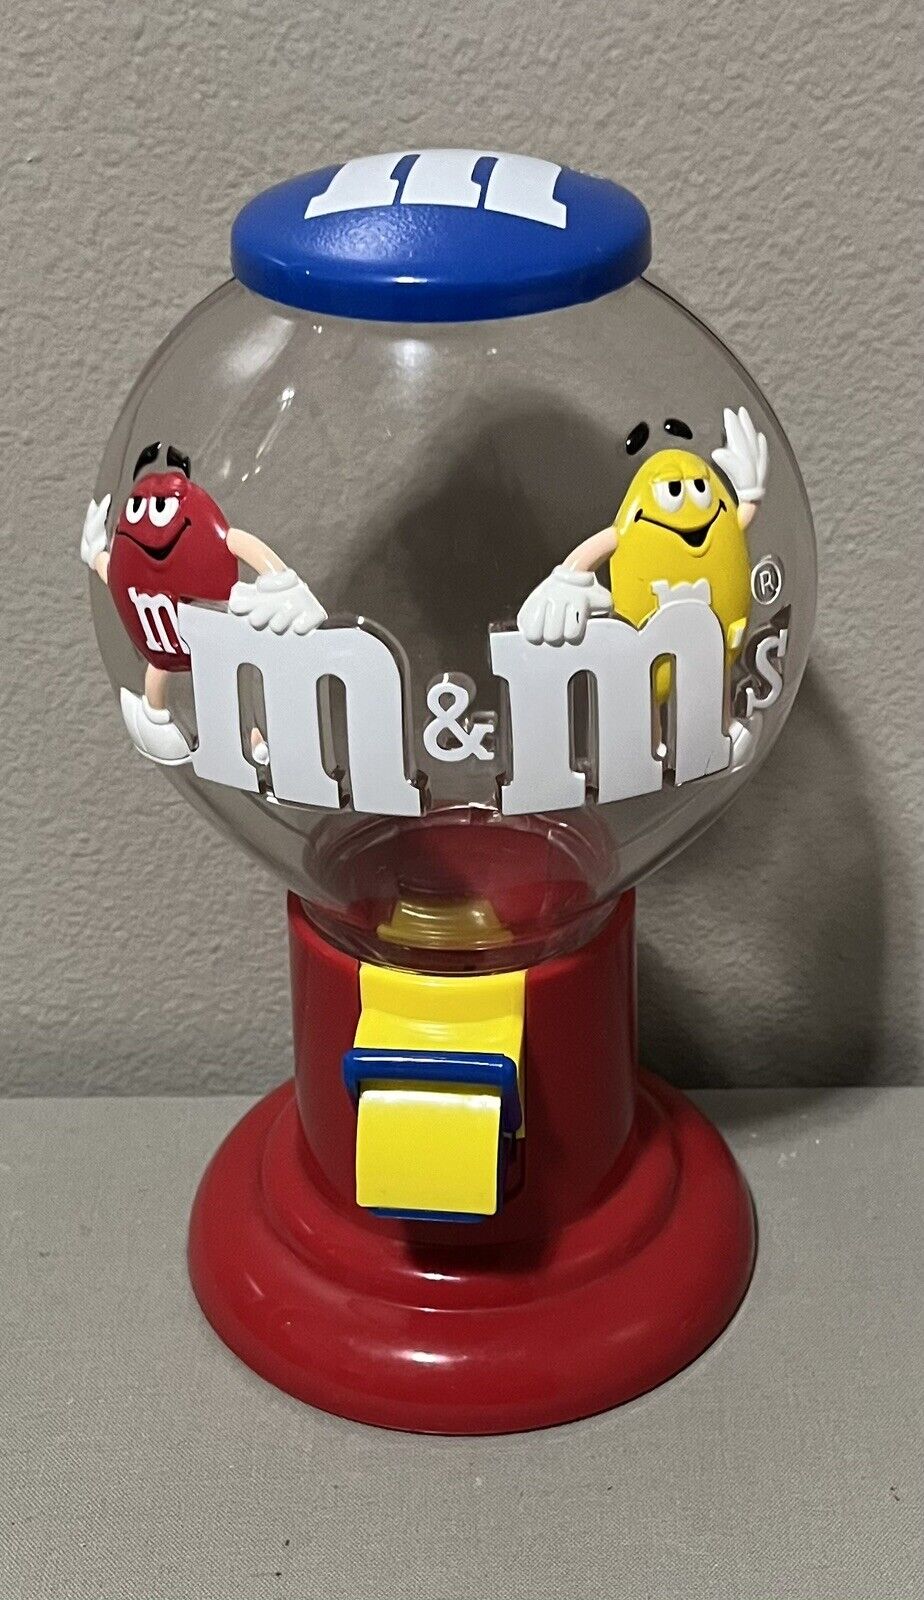 M&M Vintage Candy Dispenser Bubble Gum Gumball Machine Style Collectible 1990s